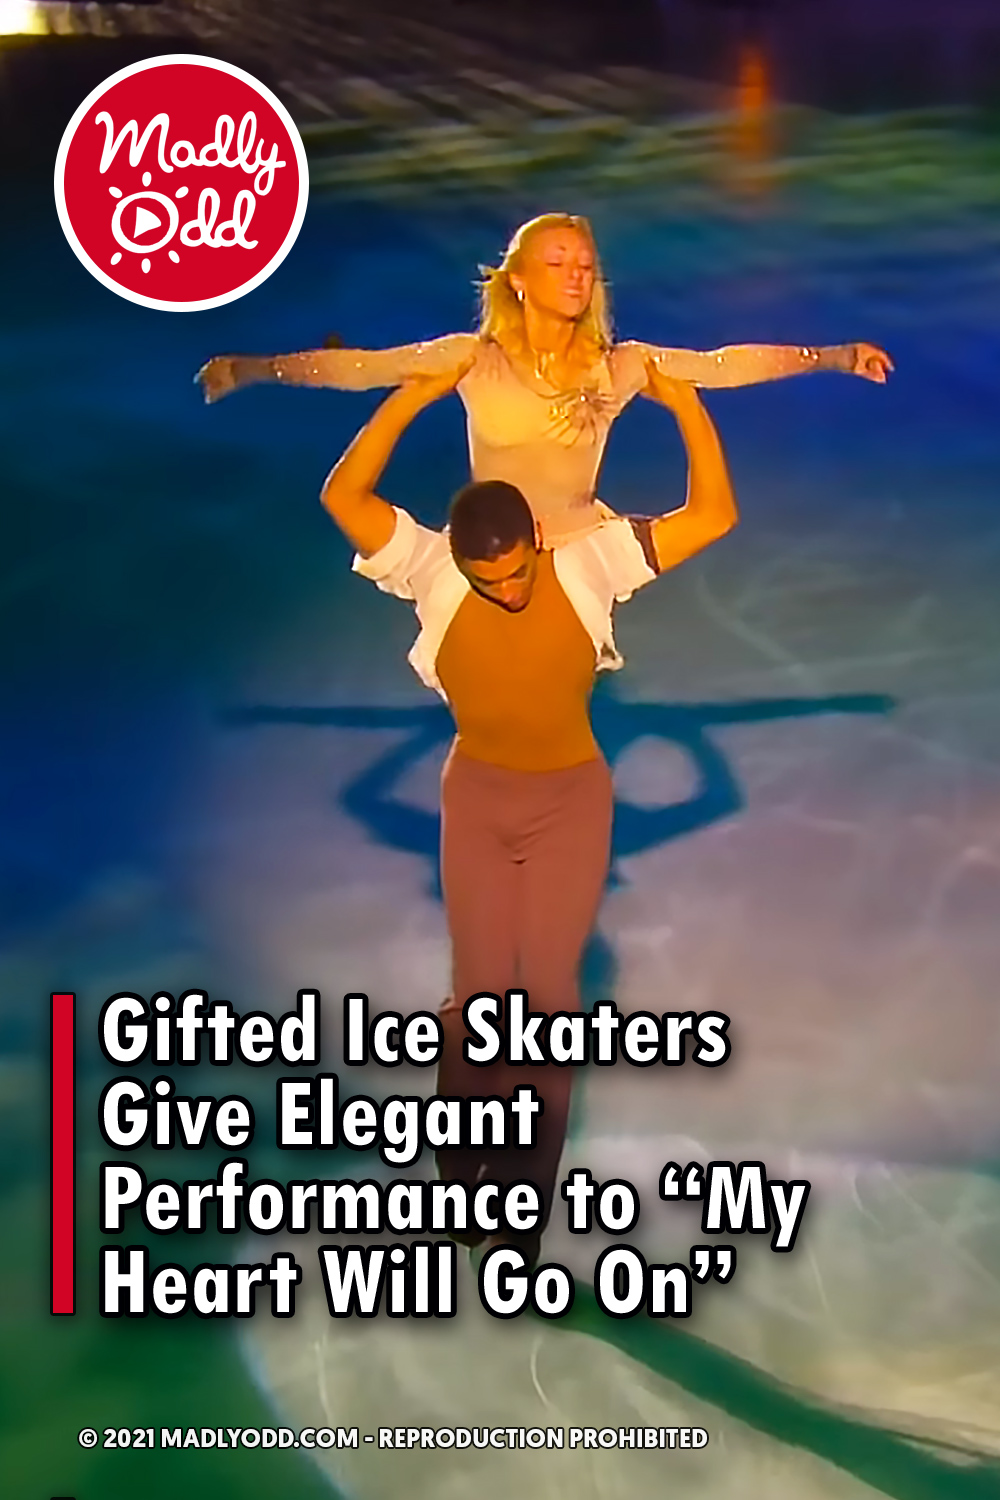 Gifted Ice Skaters Give Elegant Performance to “My Heart Will Go On”